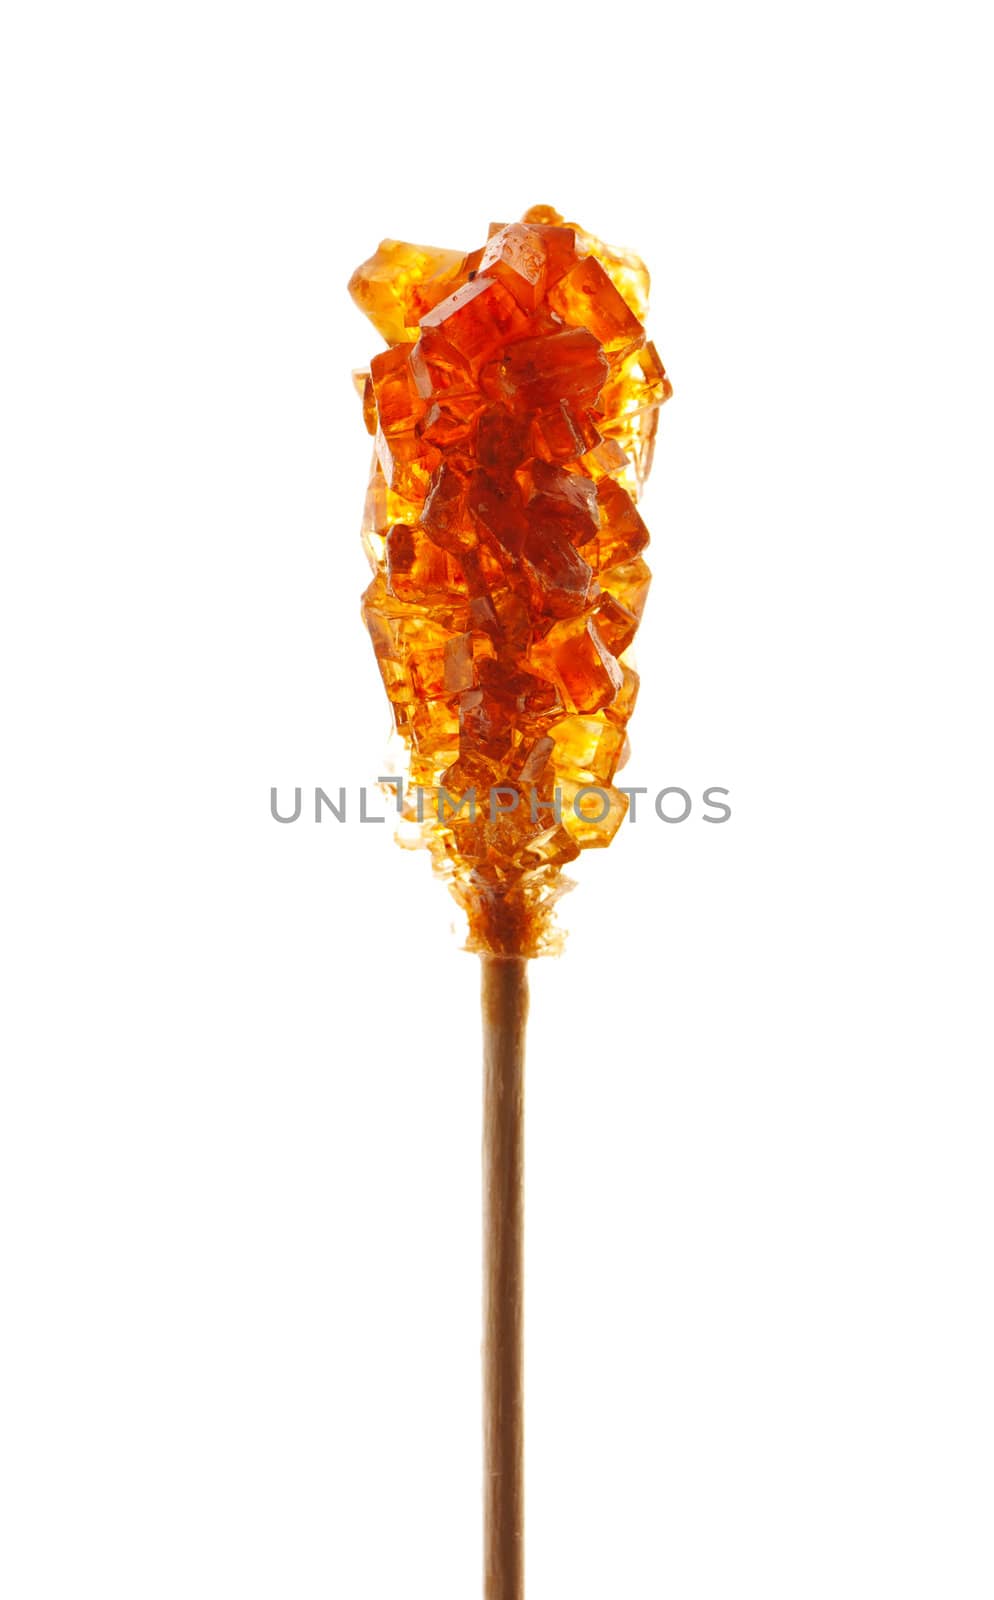 Brown sugar stick isolated on white background